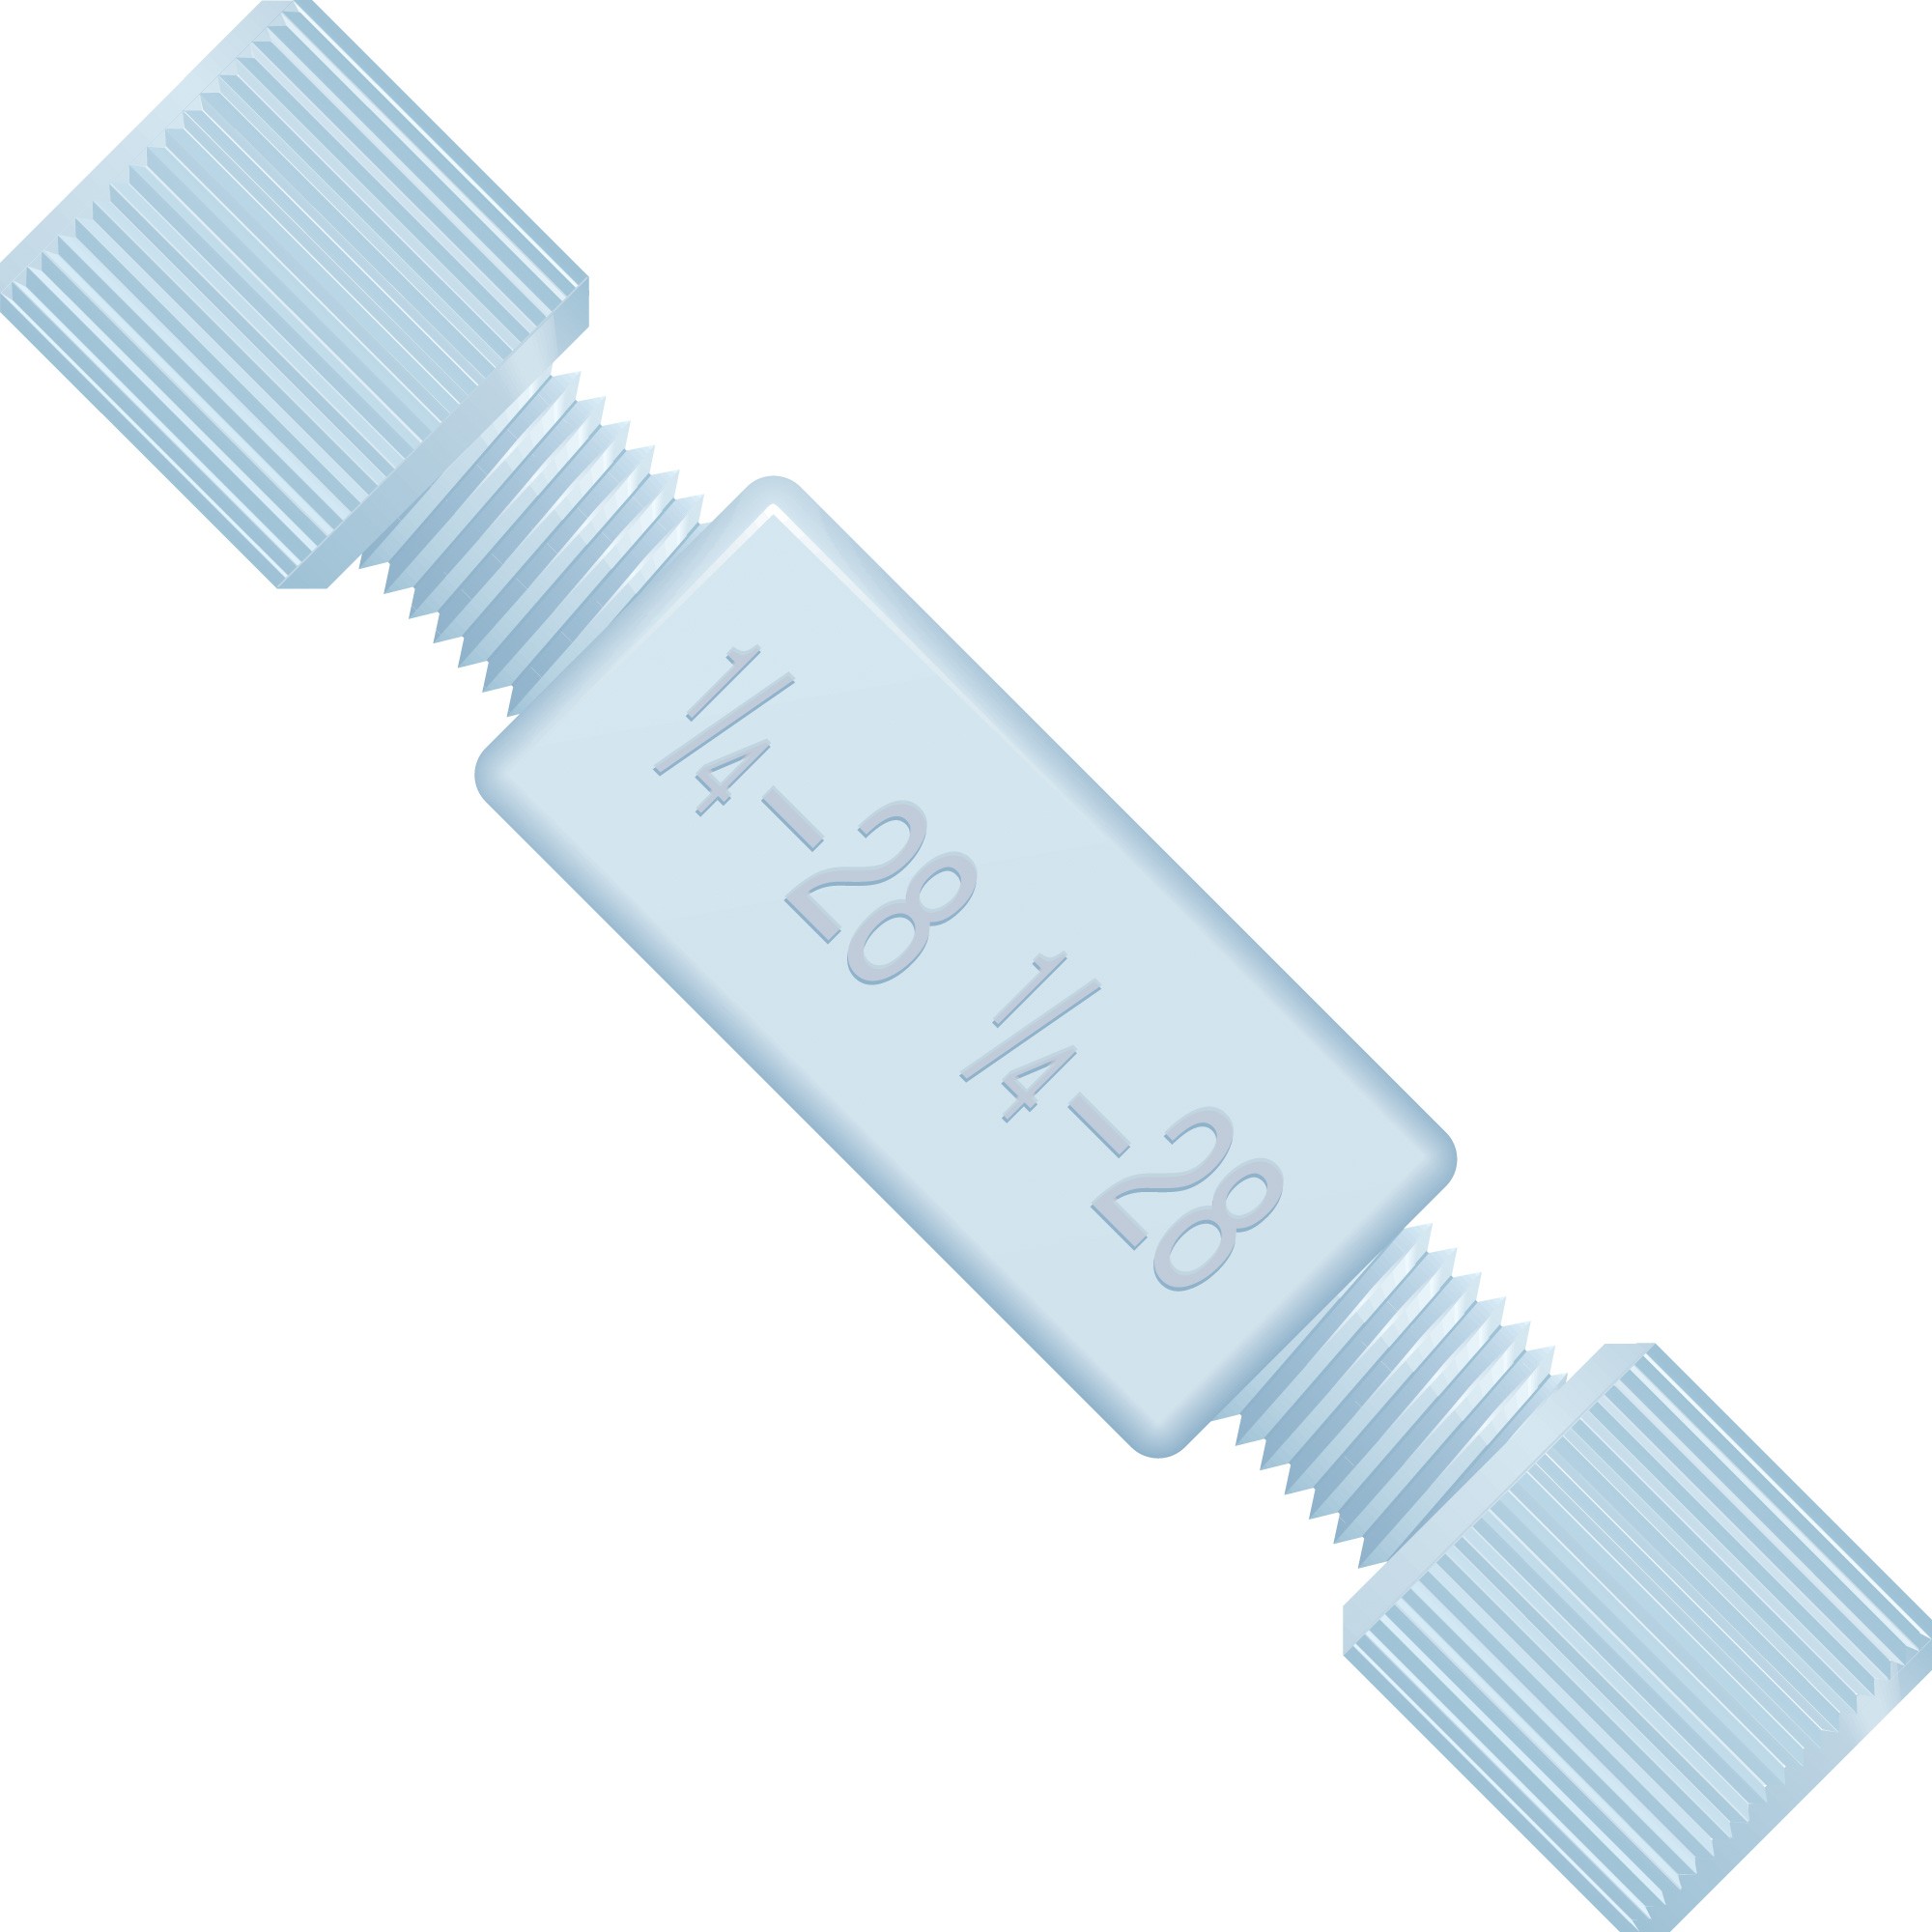 Adapters & Connectors: Union, Threaded, 1/4"-28 (Thru-Threads), ETFE